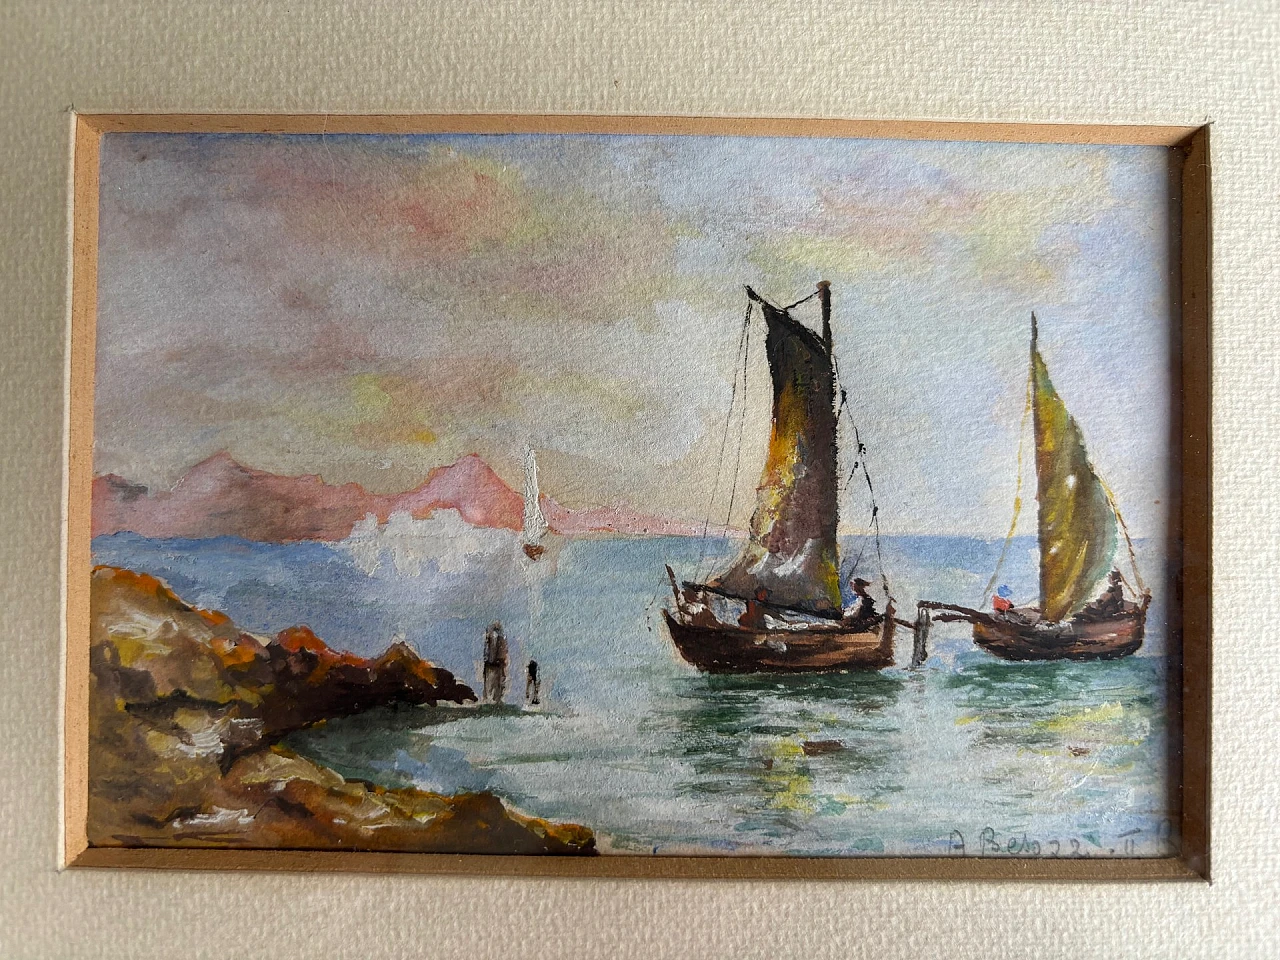 A. Besozzi, seascape with boats, painting, 1930s 4